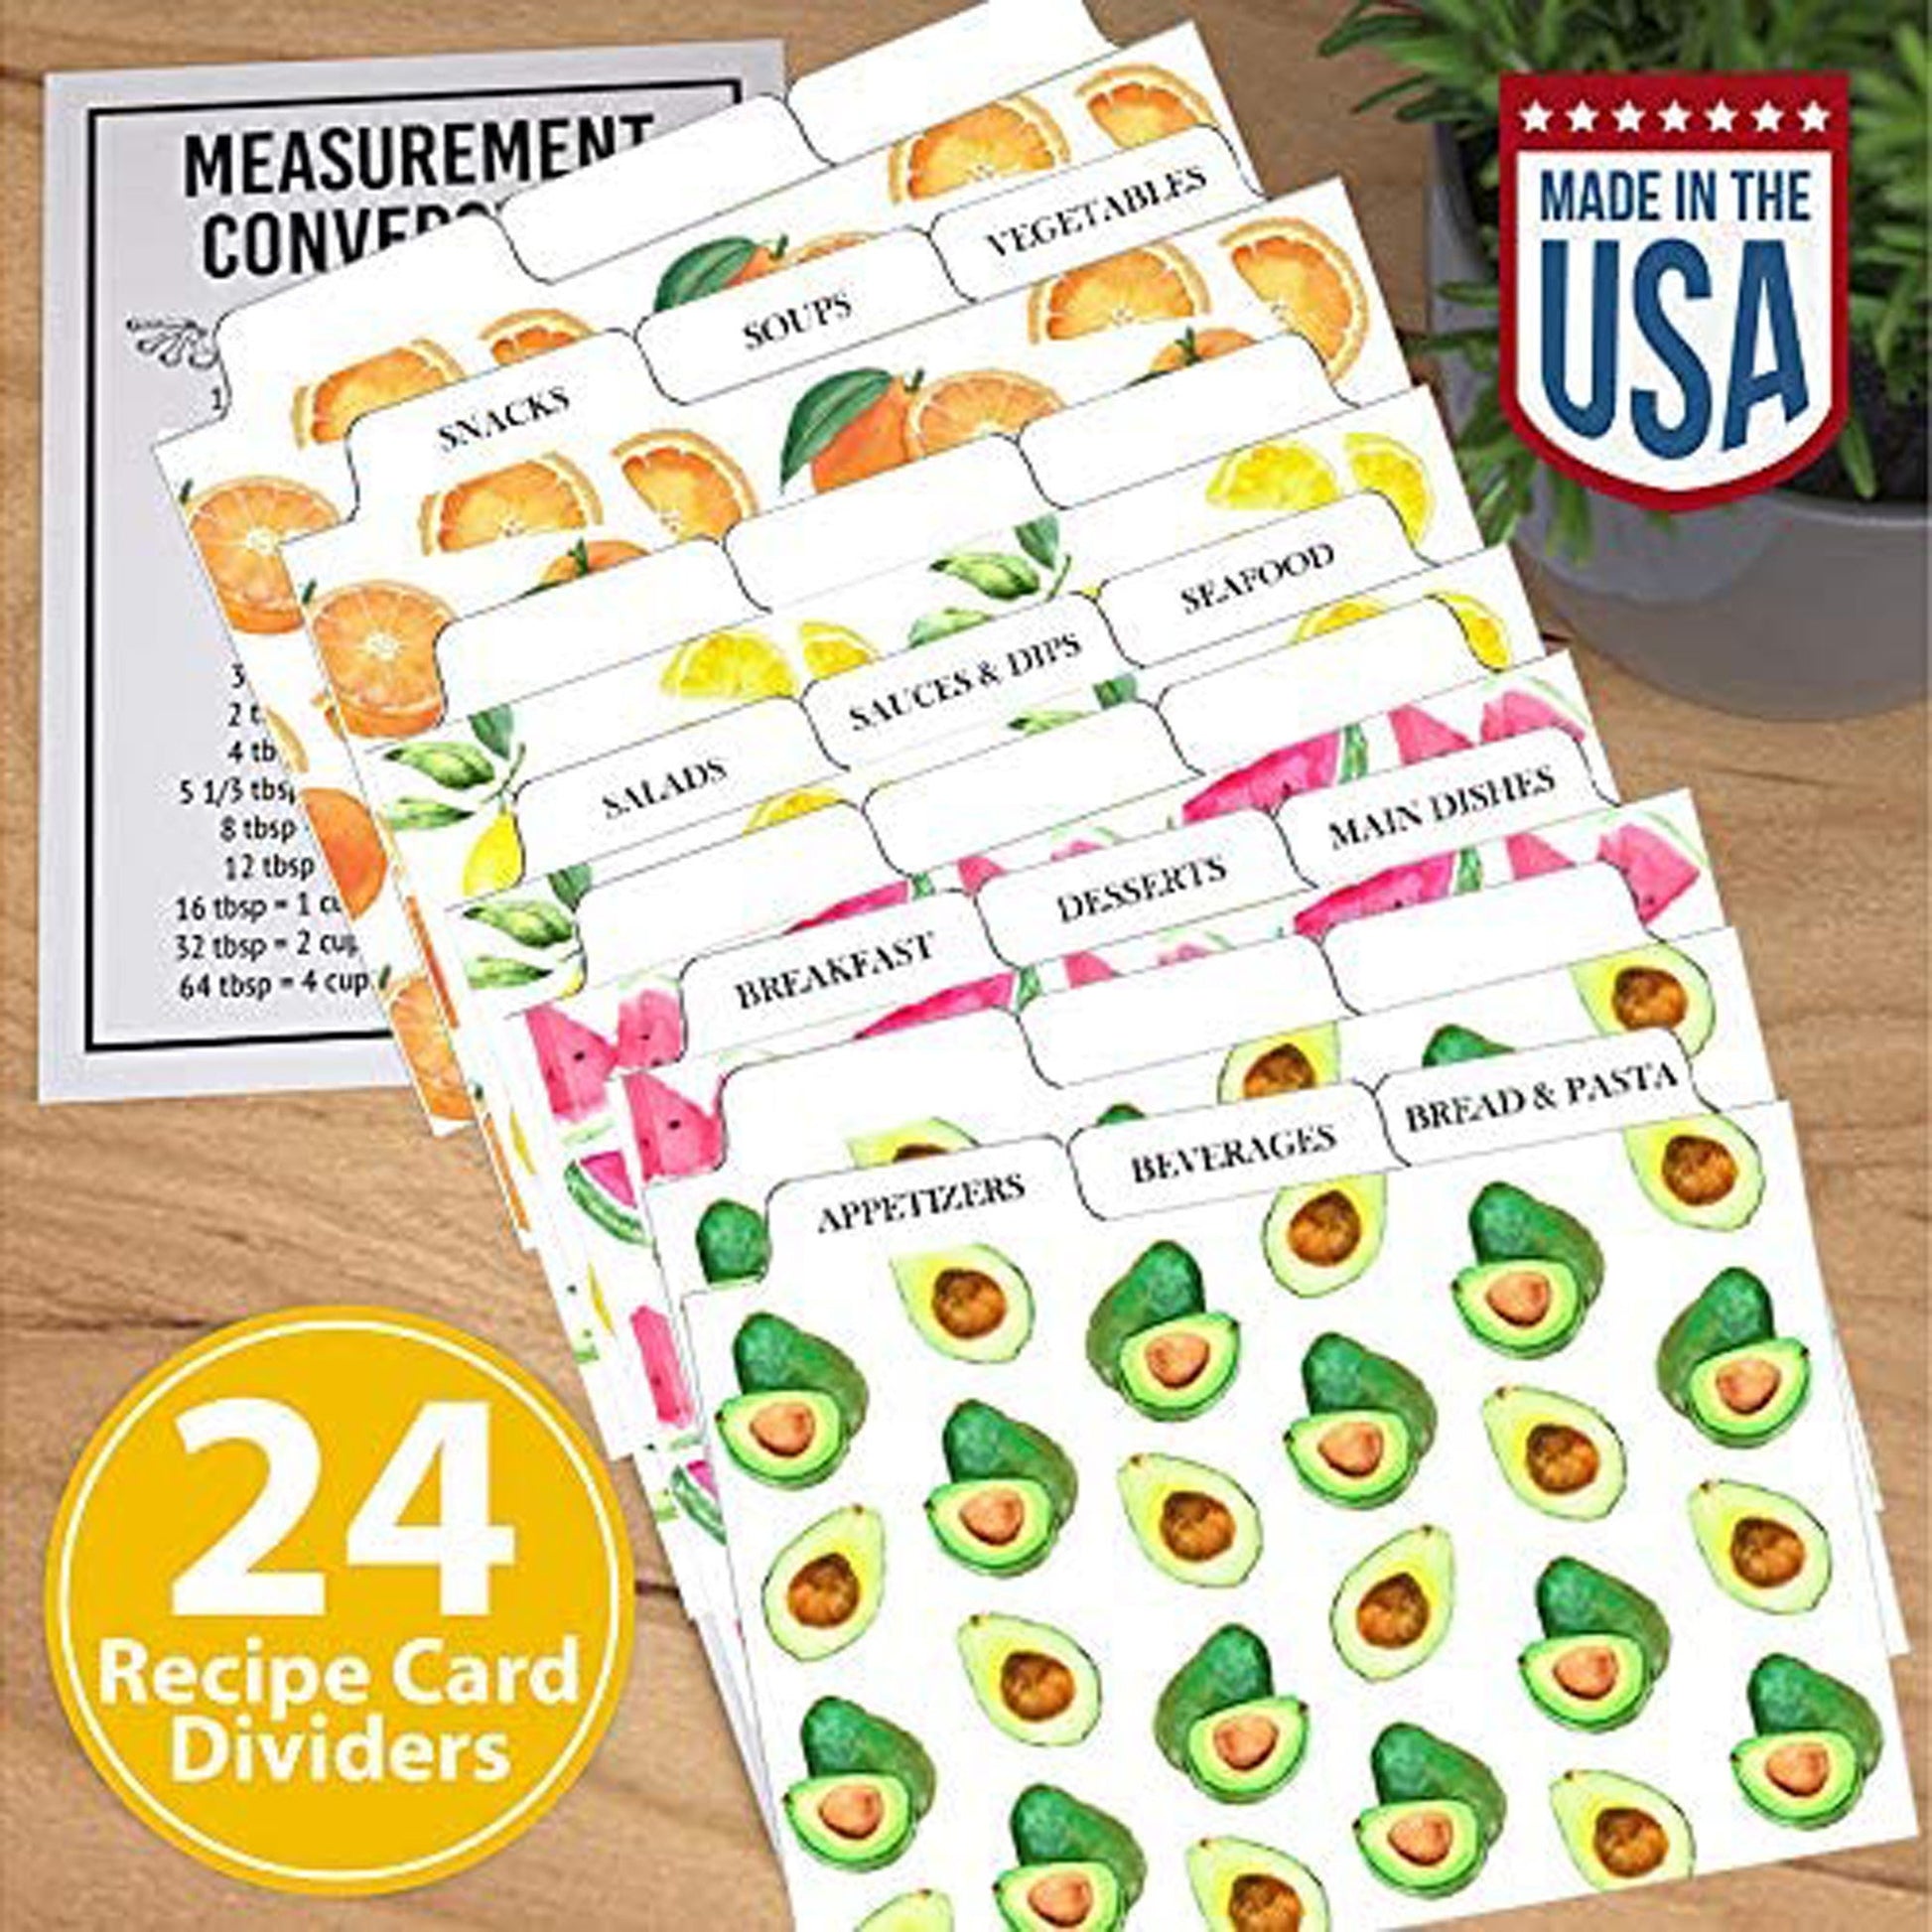 Made with Love Farmhouse Recipe Box, 100 Recipe Cards, Card Protector + 24 Dividers | White Wooden Kitchen Storage Chest for 4x6 Index Cards